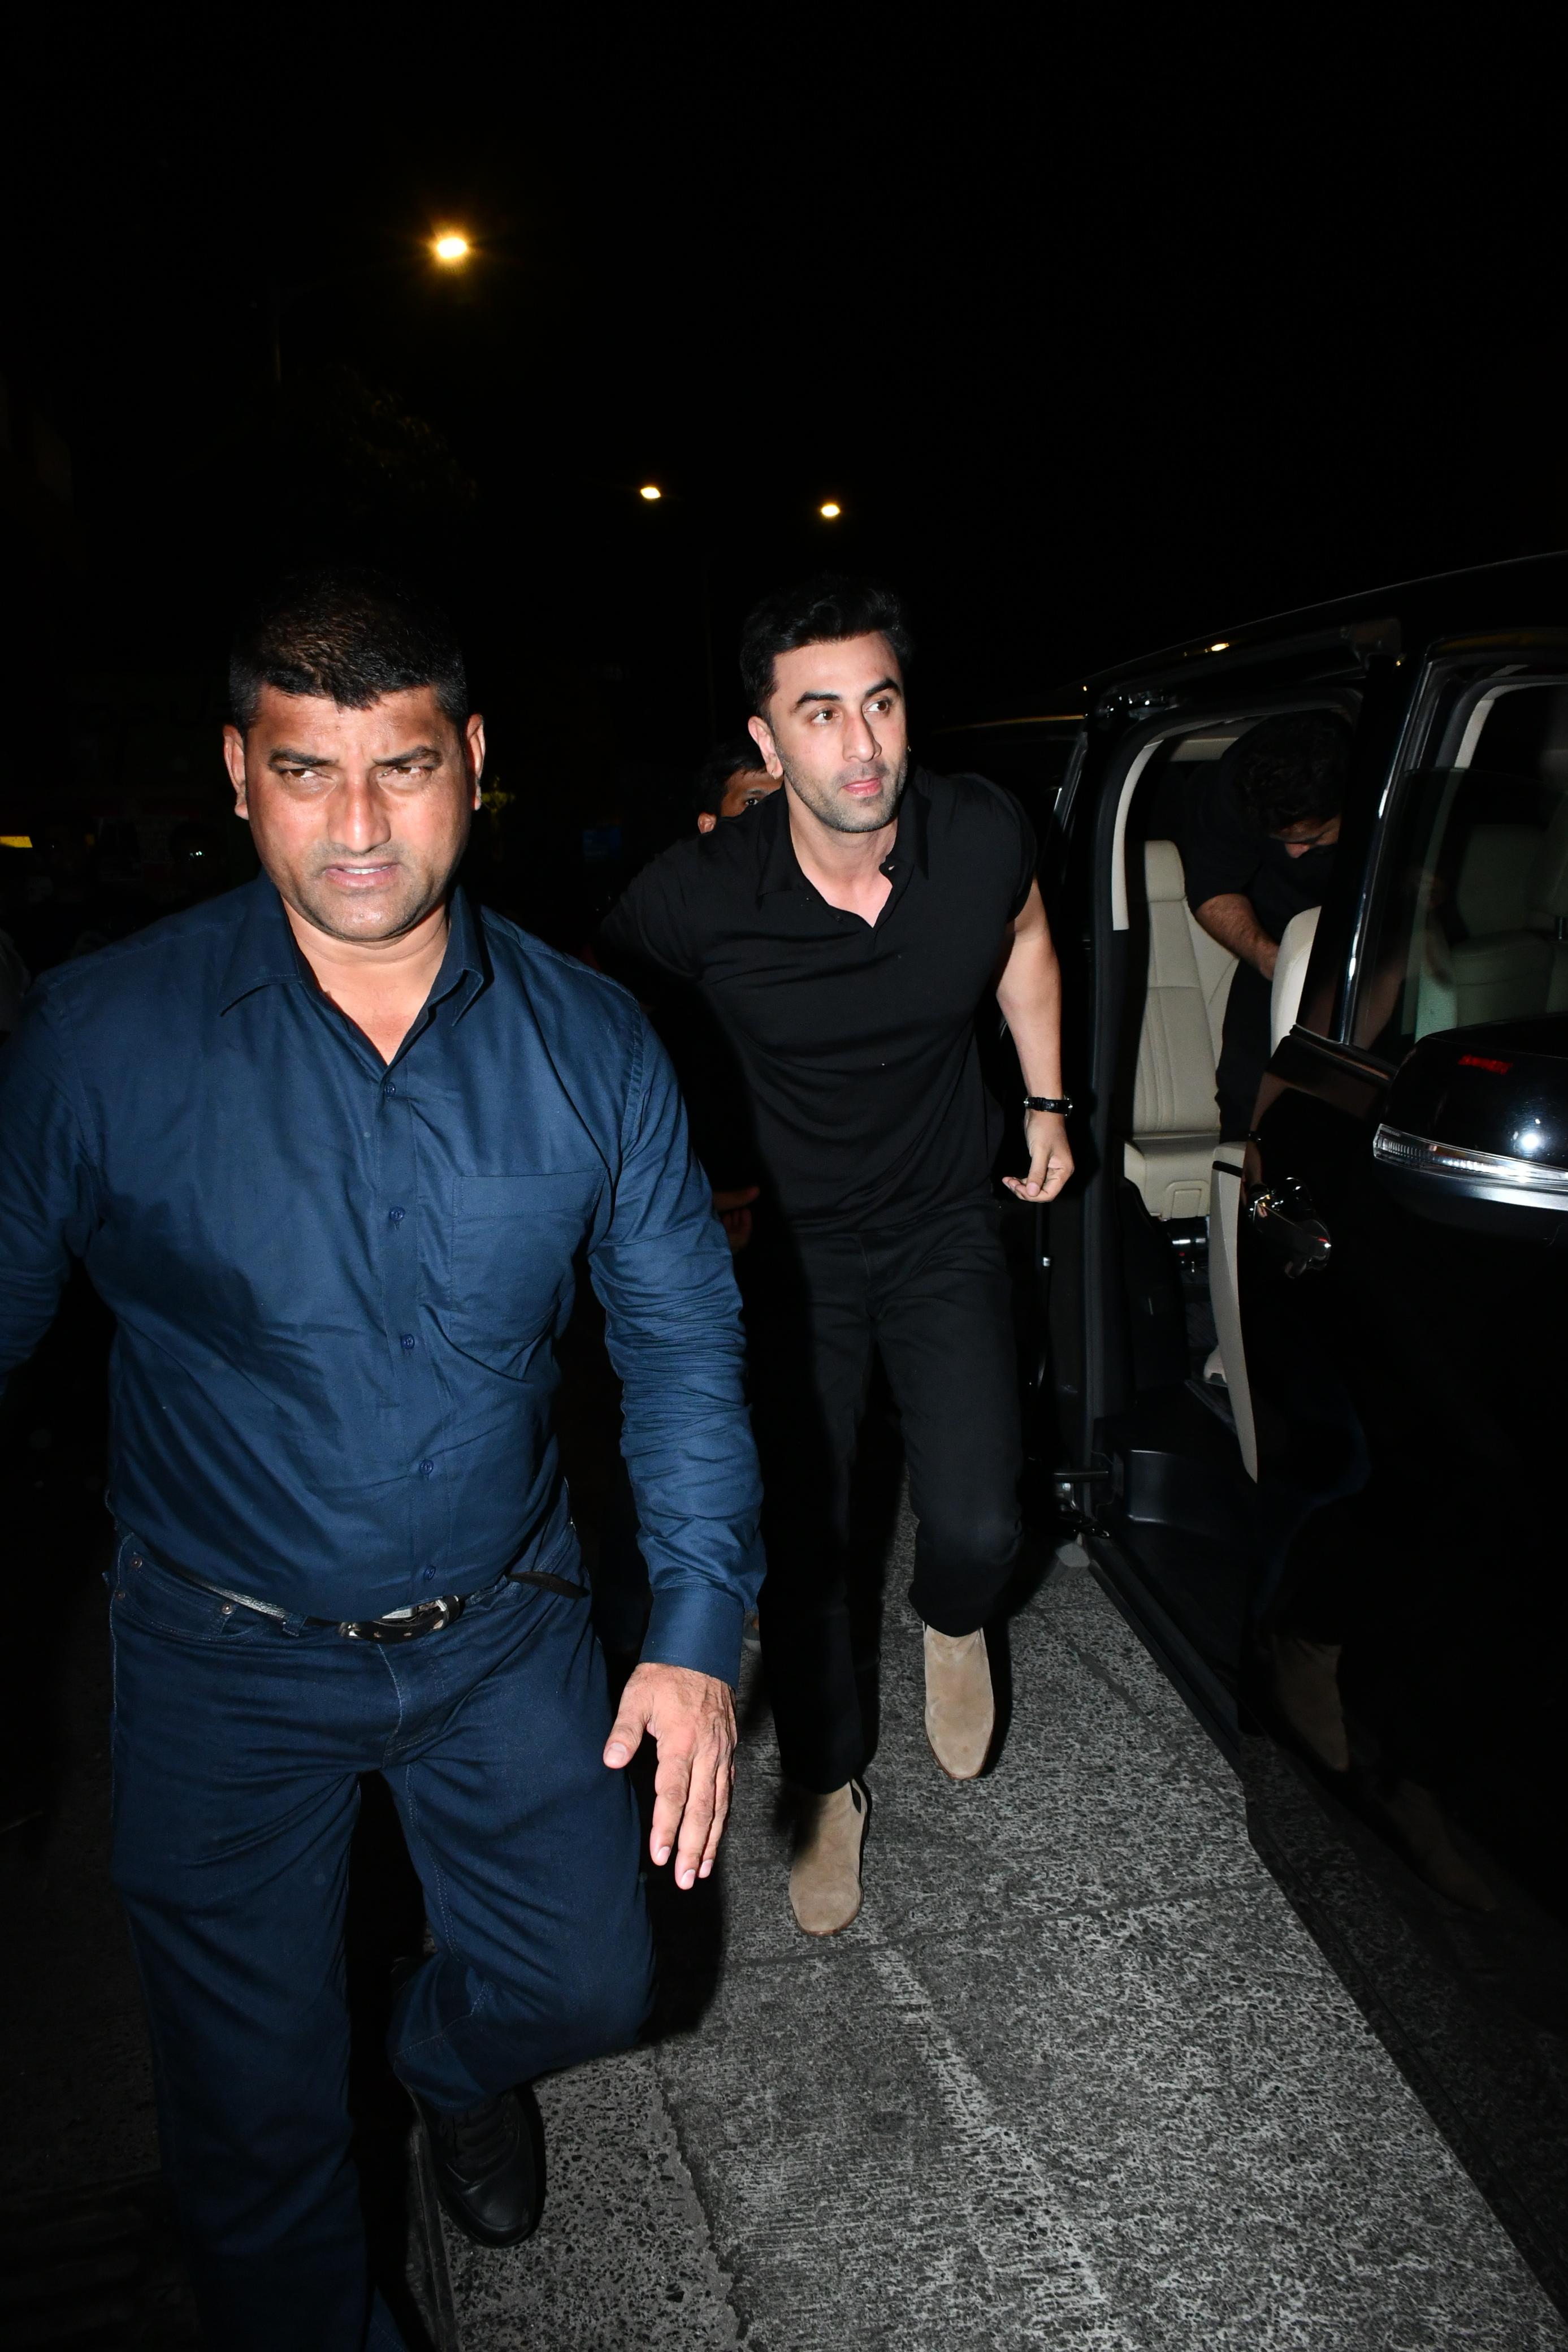 Ranbir Kapoor opted for black on black outfit for the night and went to the restaurant with JR NTR